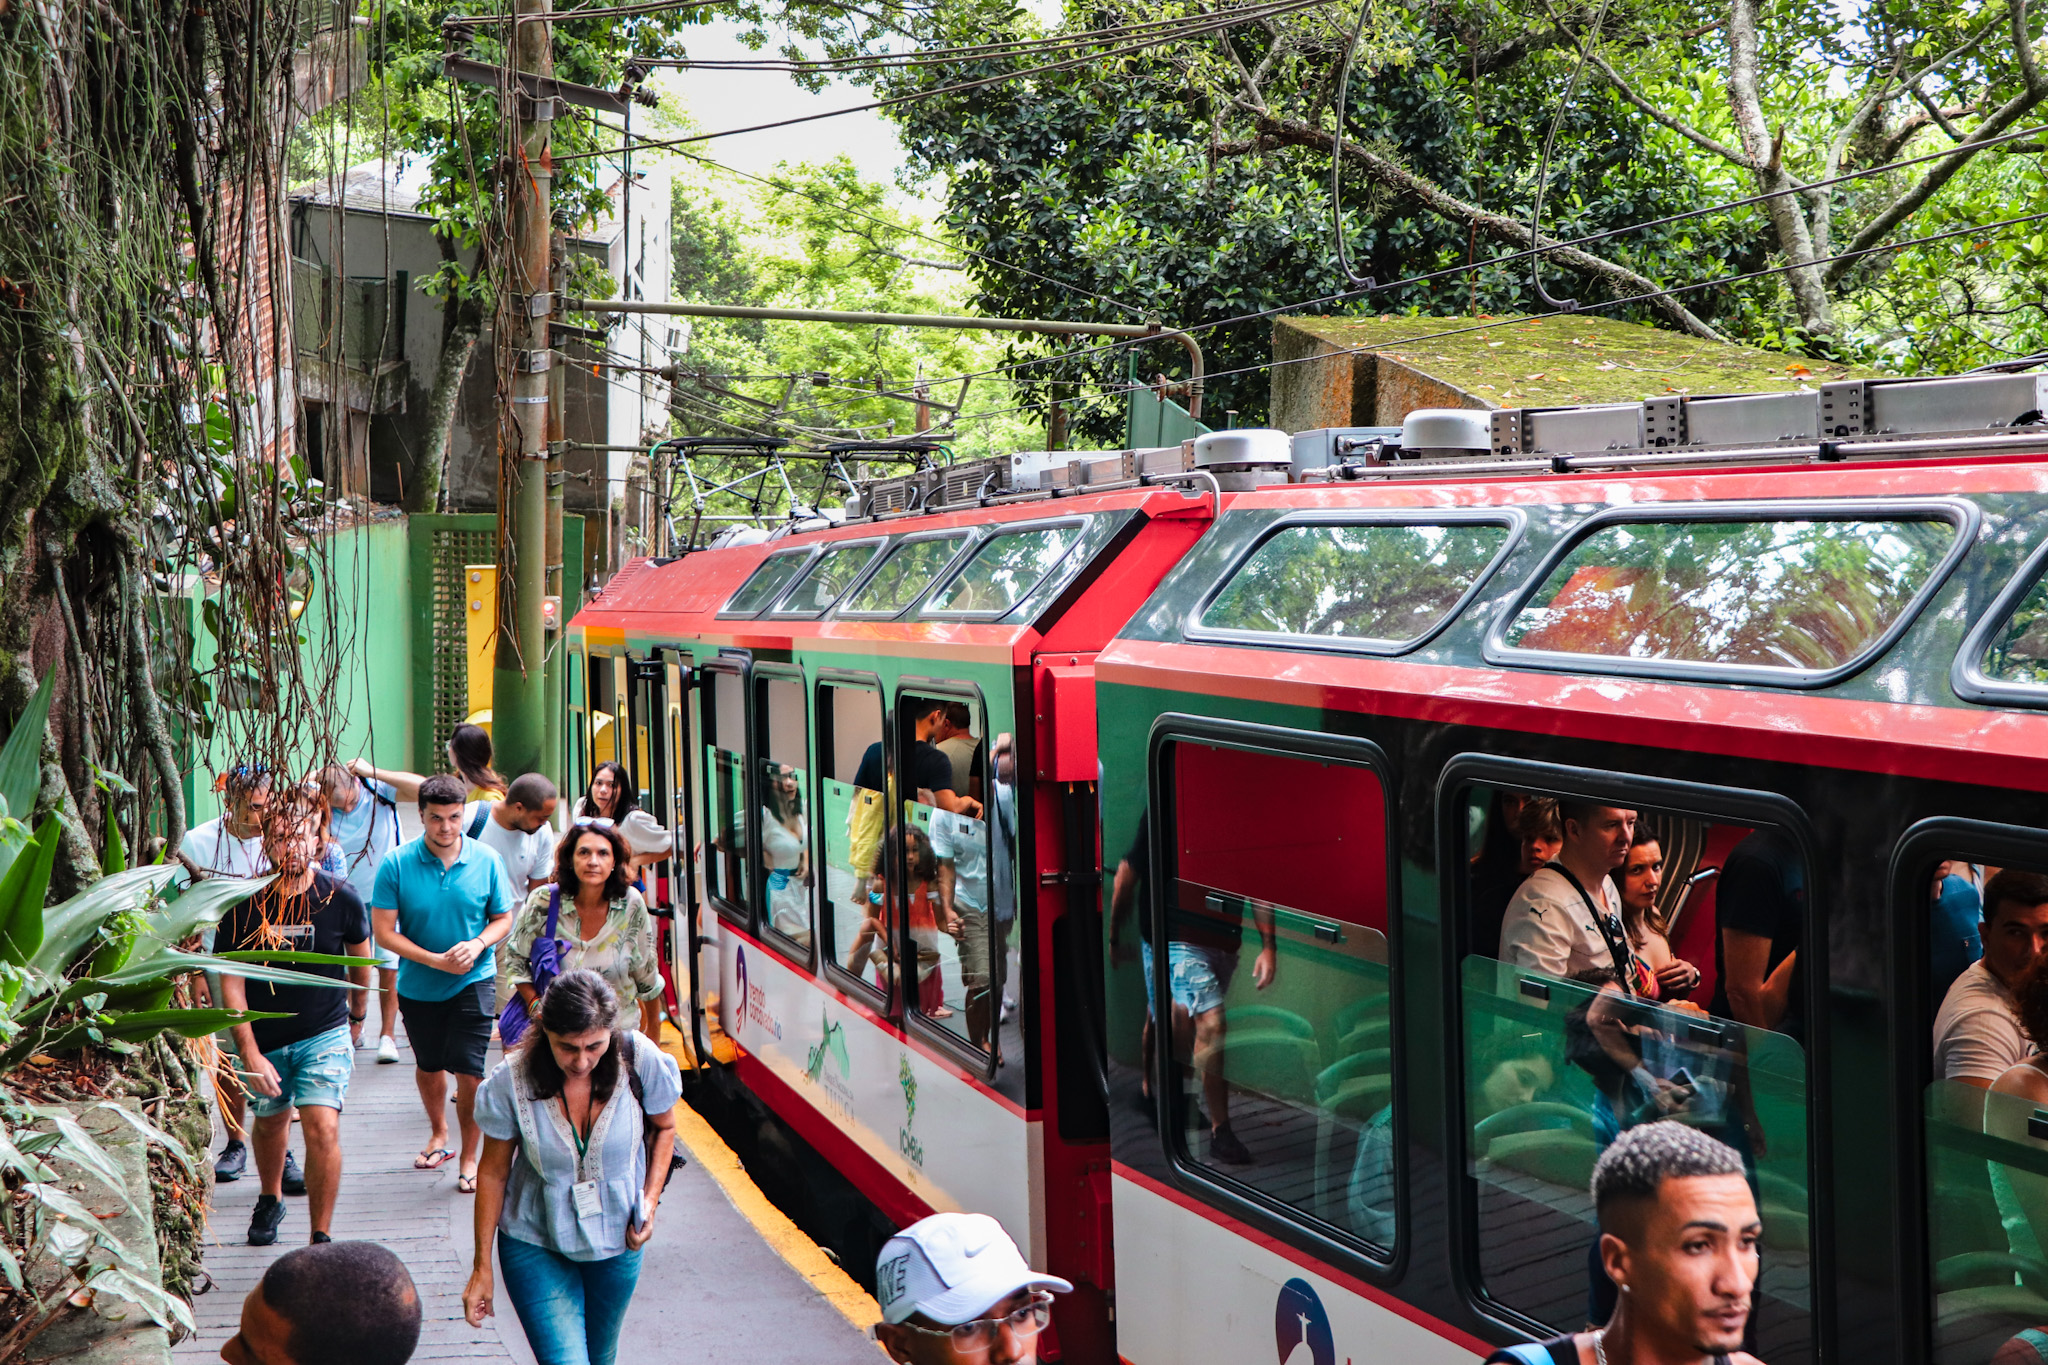 Rio de Janeiro Travel Guide: Take a train up to the Christ the Redeemer viewpoint